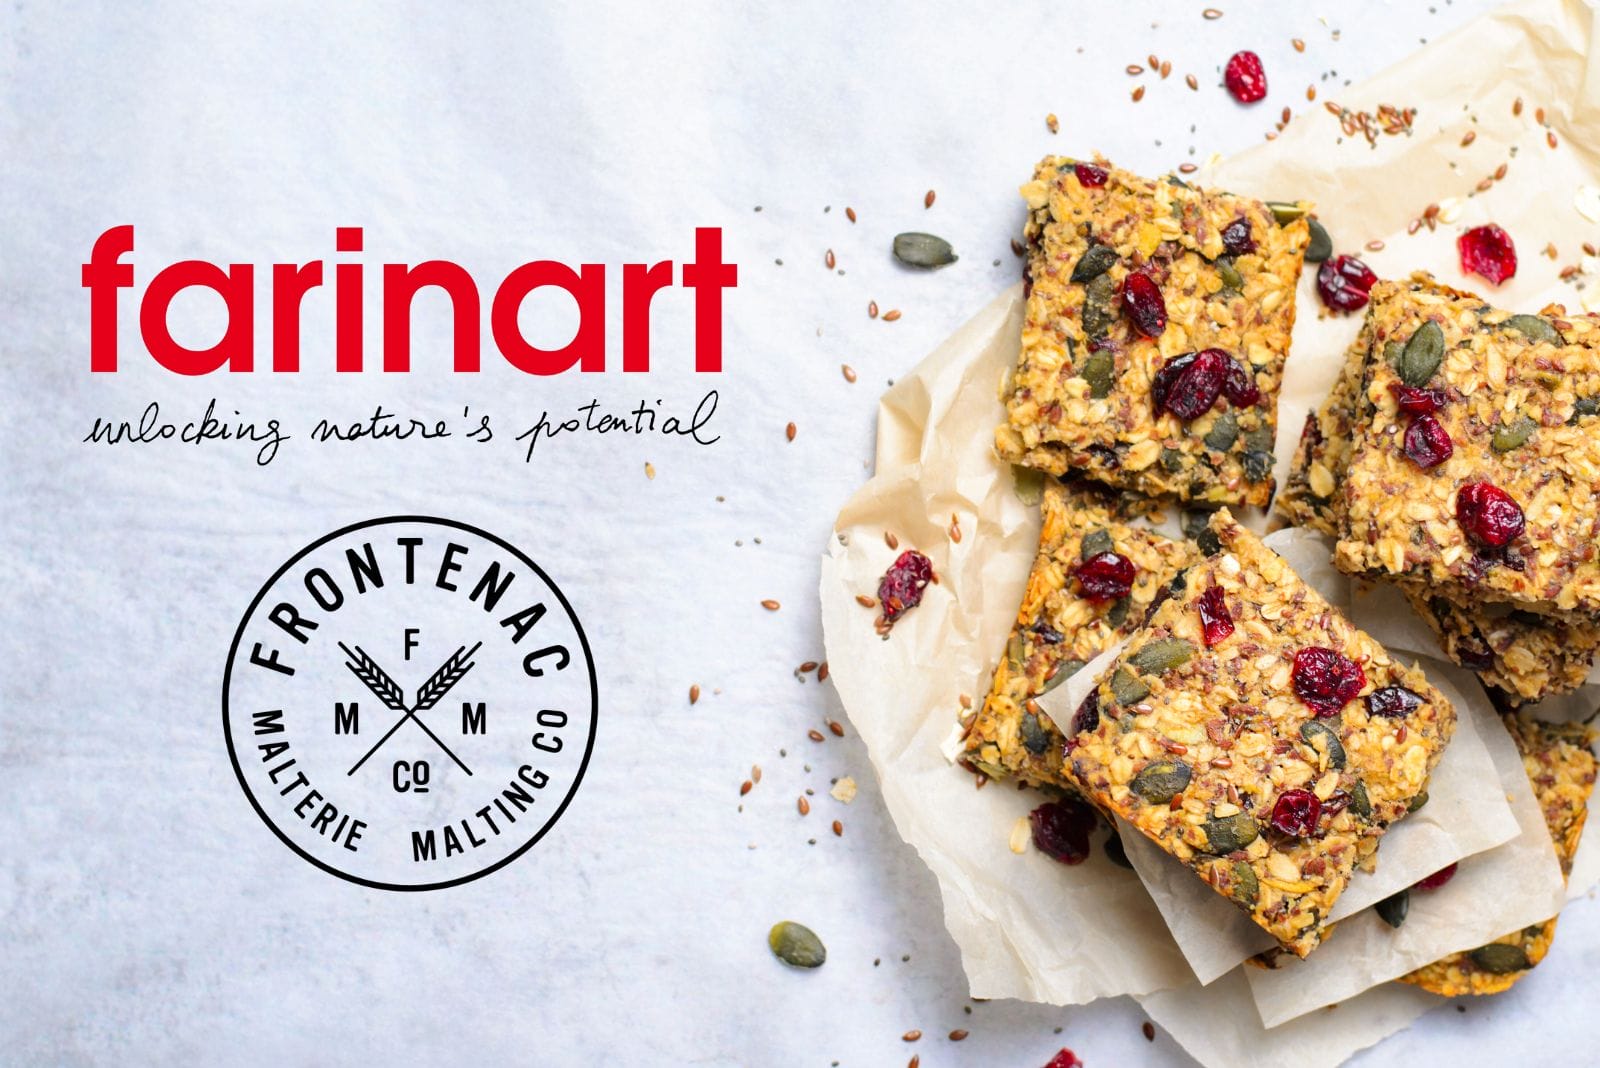 Farinart and Malterie Frontenac logos next to baked bars featuring grains and seeds